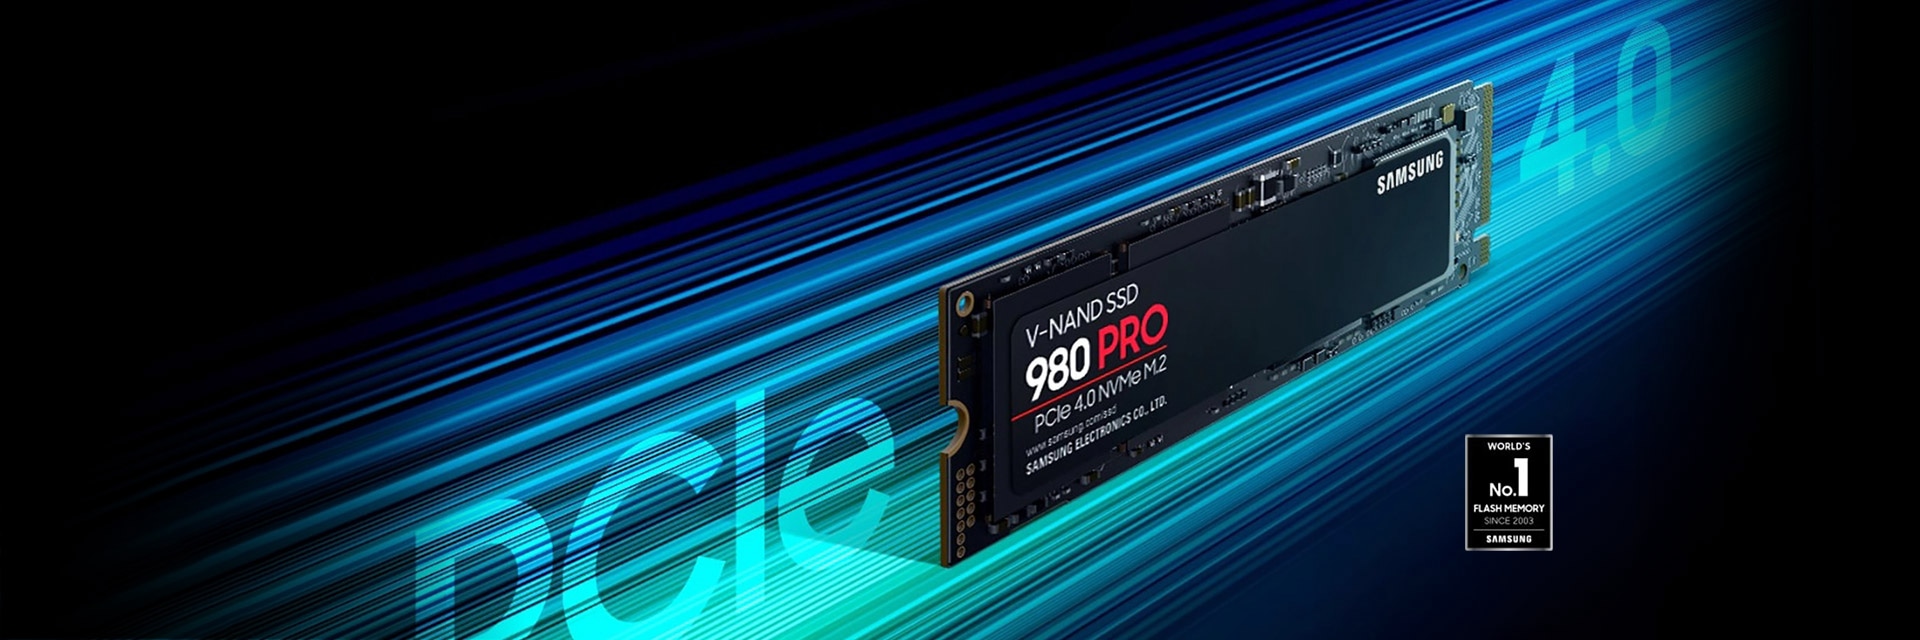 An illustrative image of Samsung SSD 980 PRO in front and silver color and seal of World's No. 1 Flash Memory.